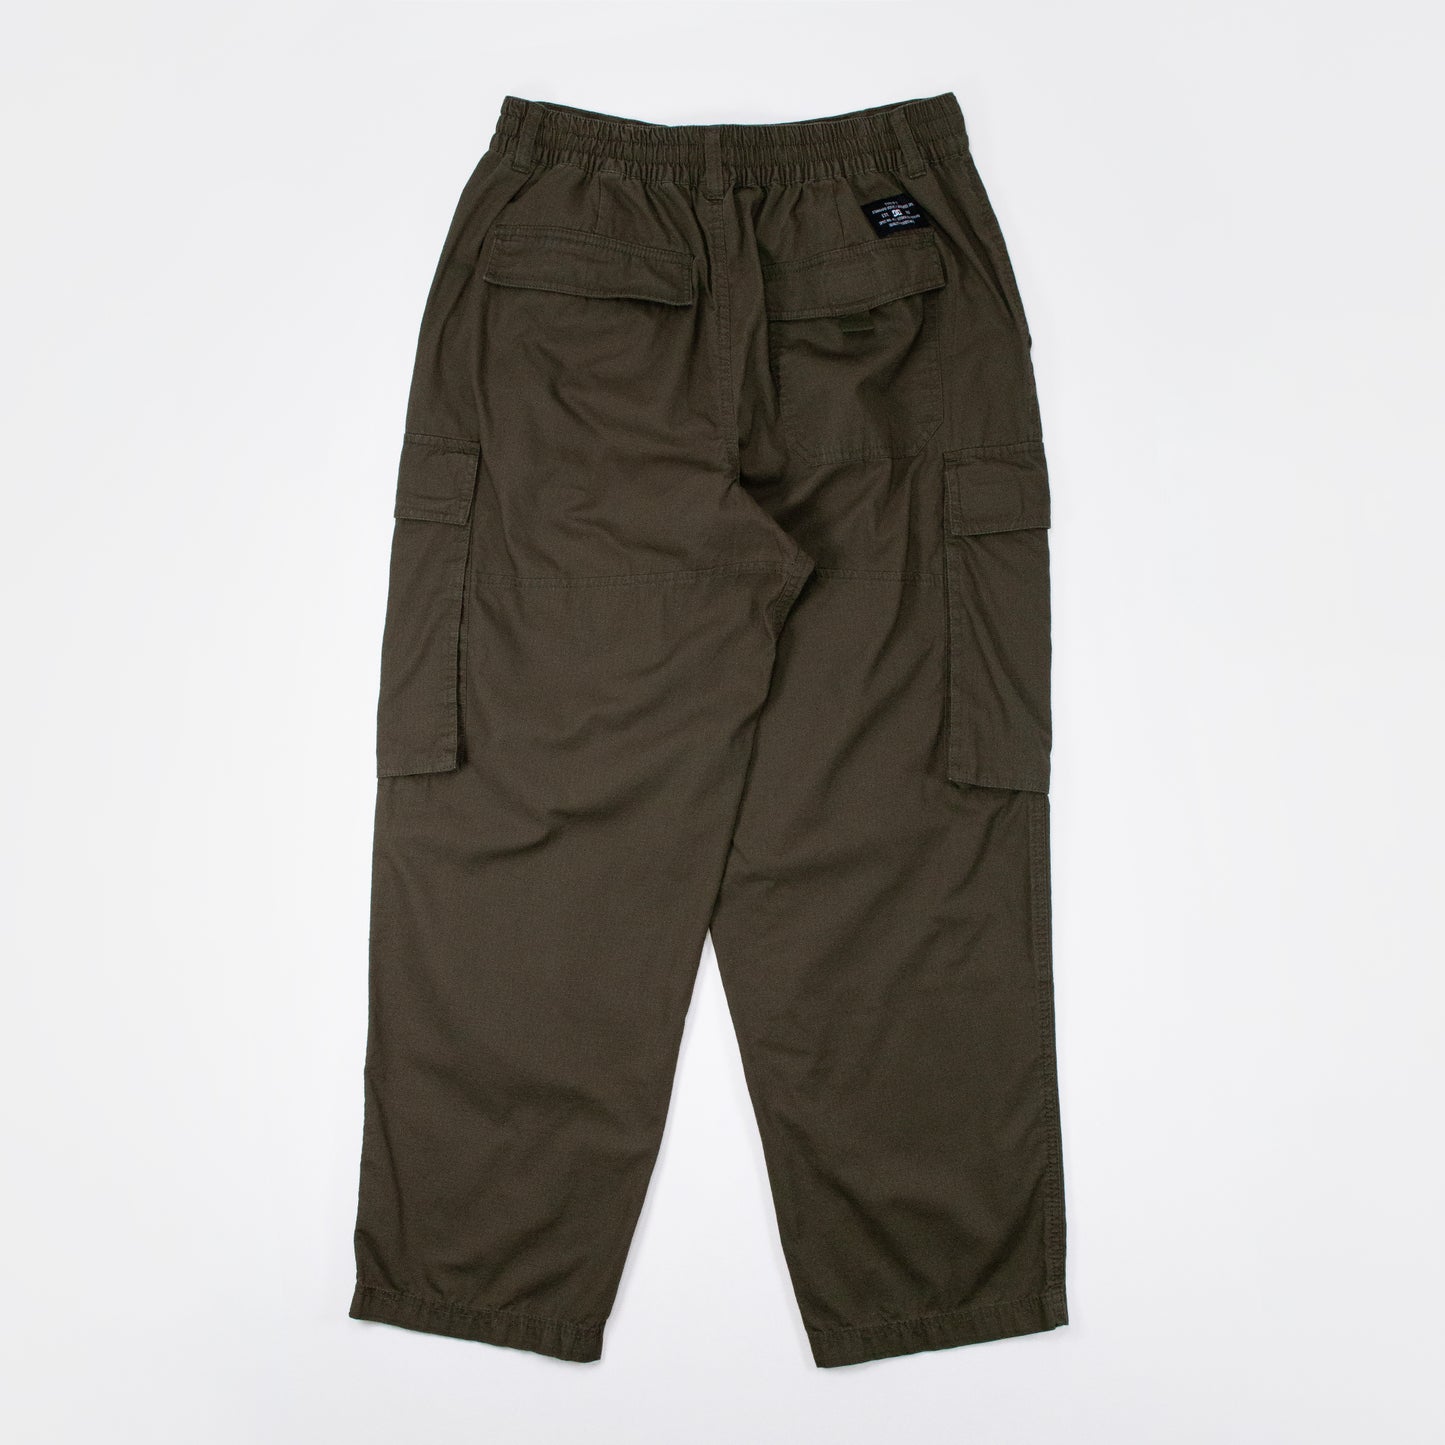 DC Tundra Pant - Ivy Green - Prime Delux Store